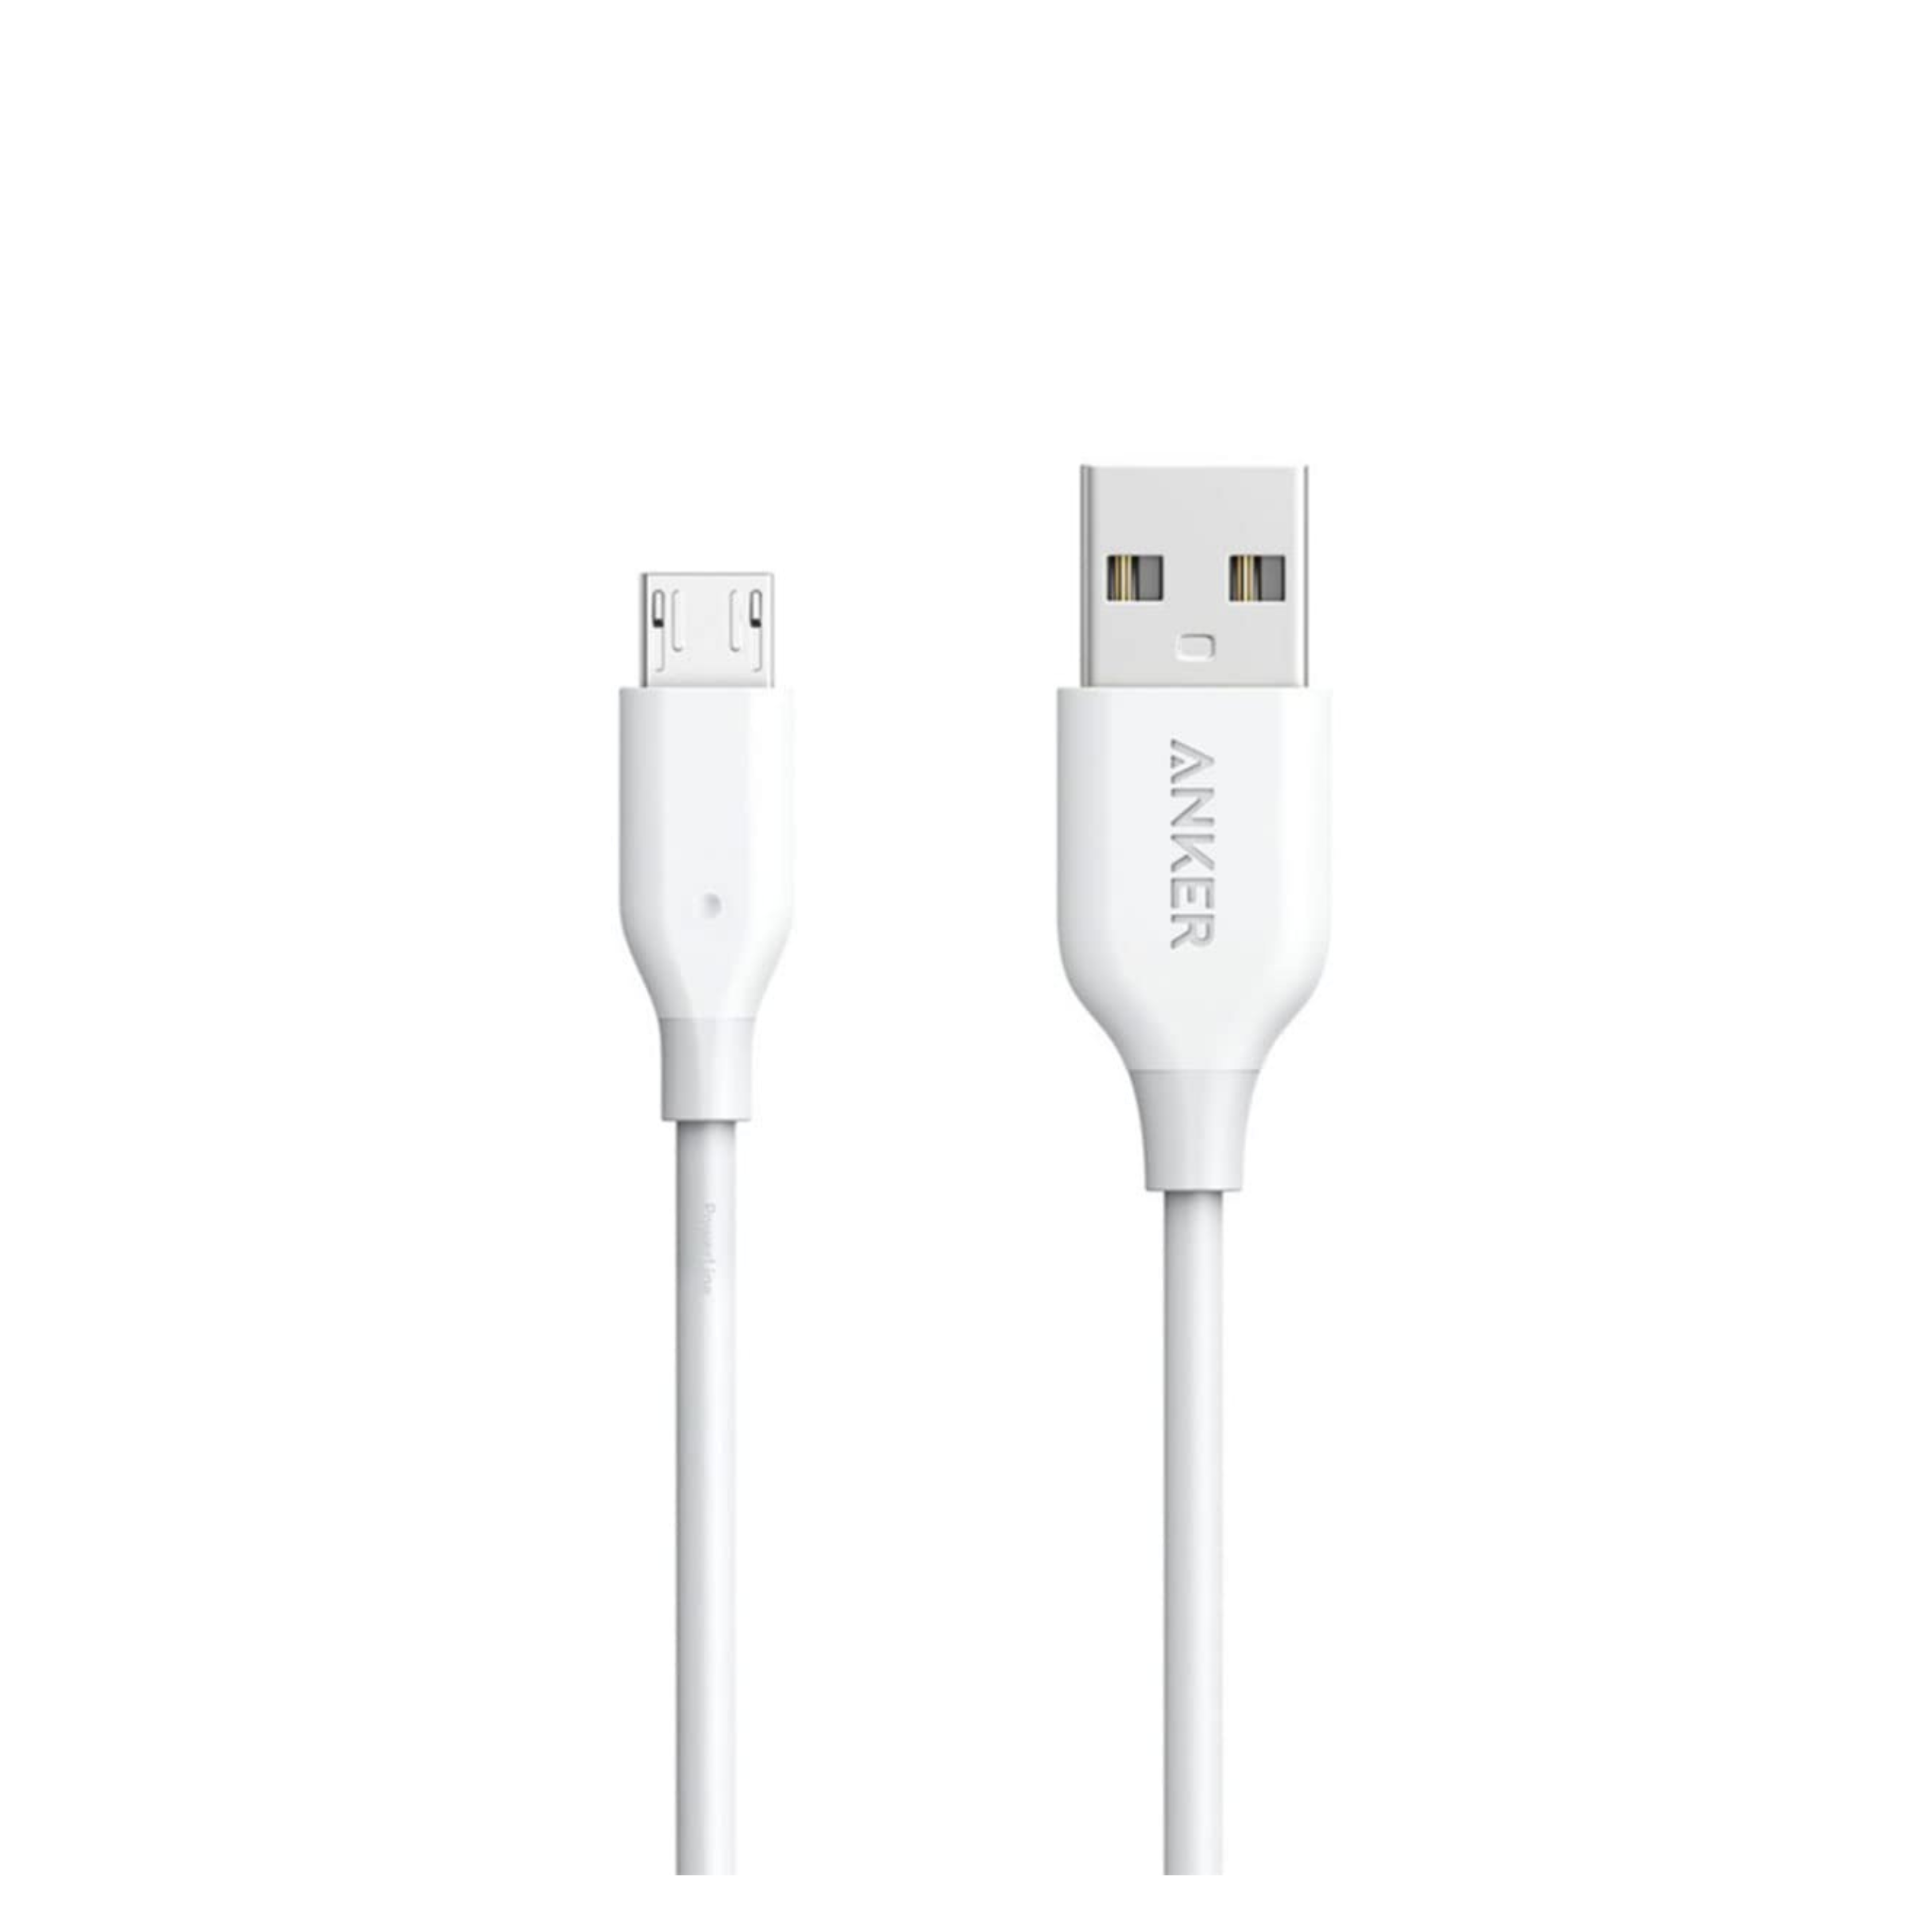 Anker 3ft Power Line Micro USB Cable - White, A8132H21